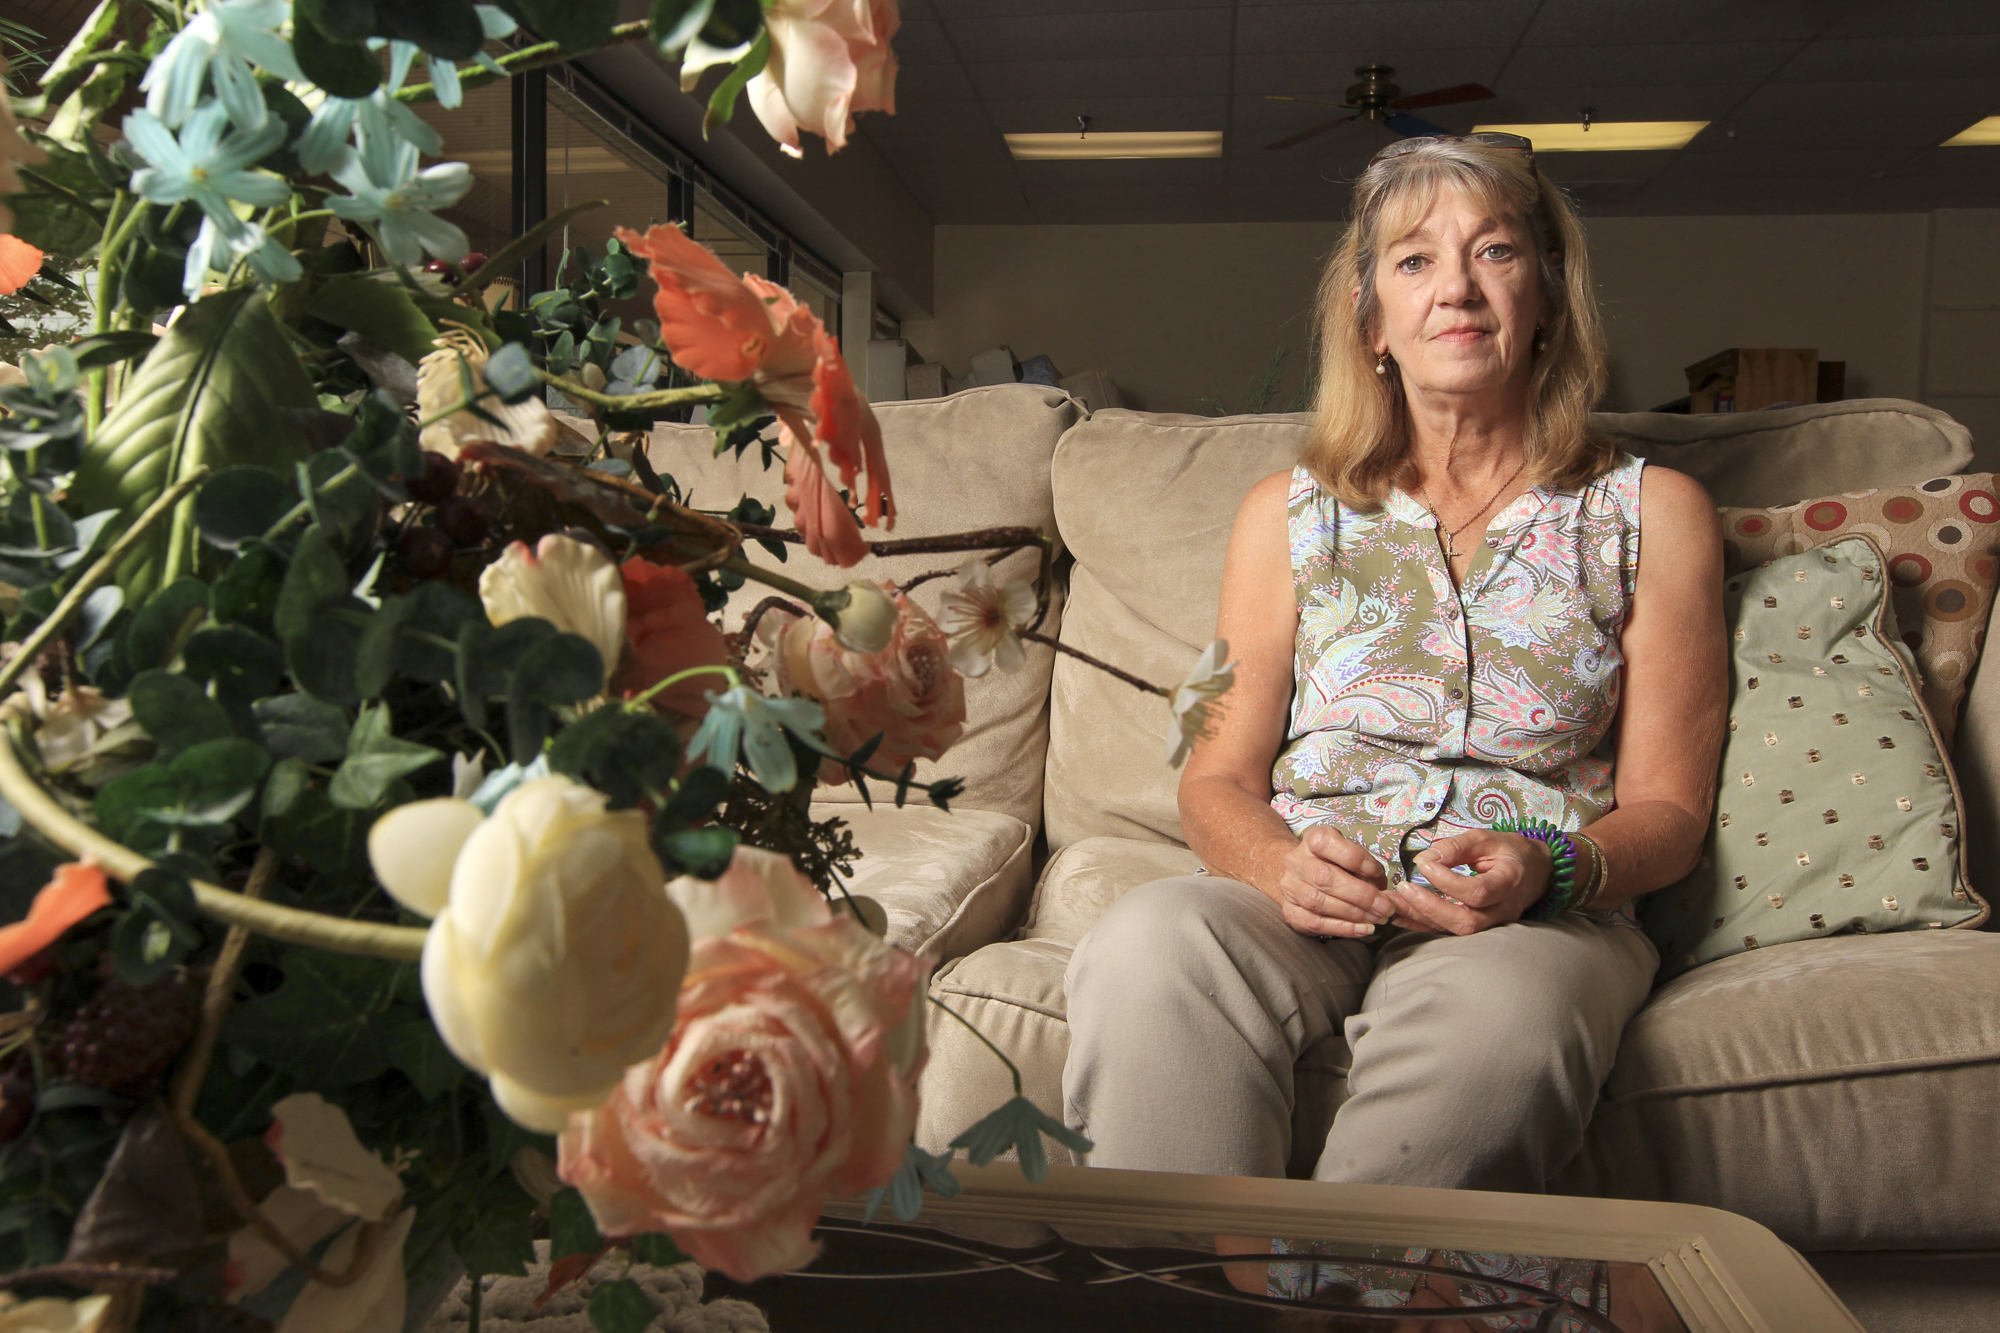 Colleen Goldrick, 57, lost her daughter to drugs before overcoming her own addiction with the help of New Beginnings. (Photo by Troy Herring)